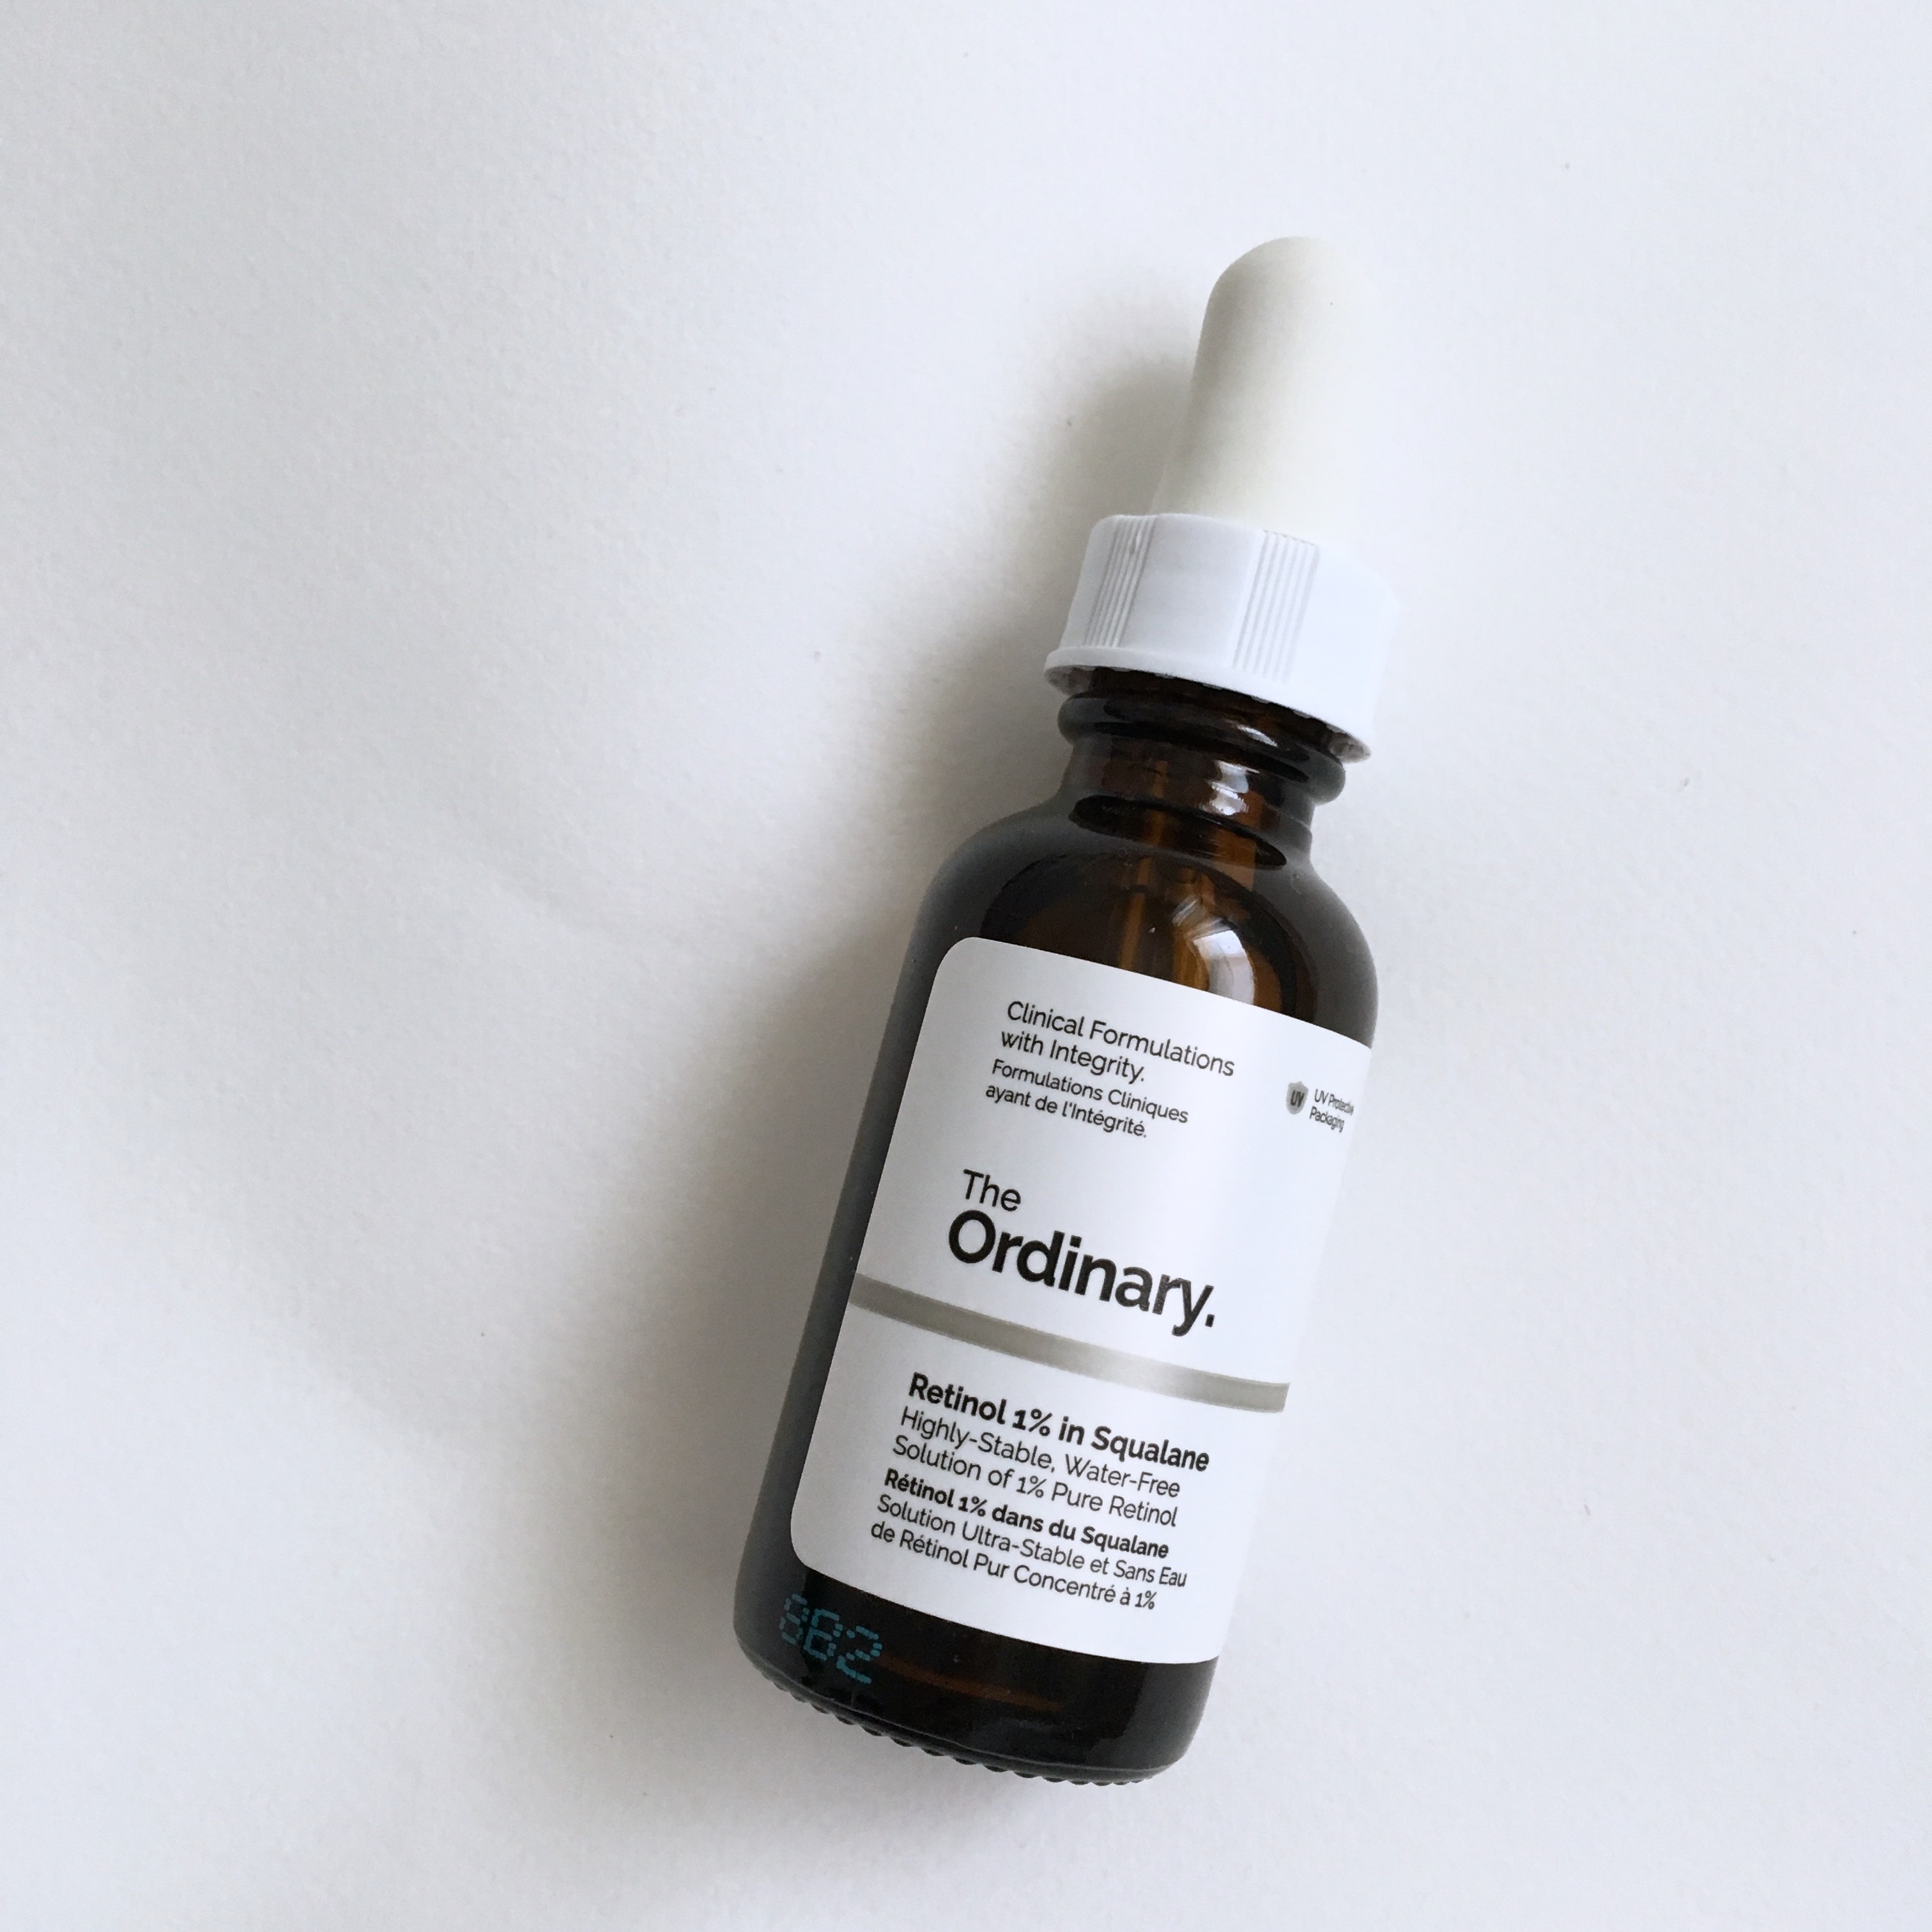 Oh My, The Purge: The Ordinary Retinol 1% in Squalane review